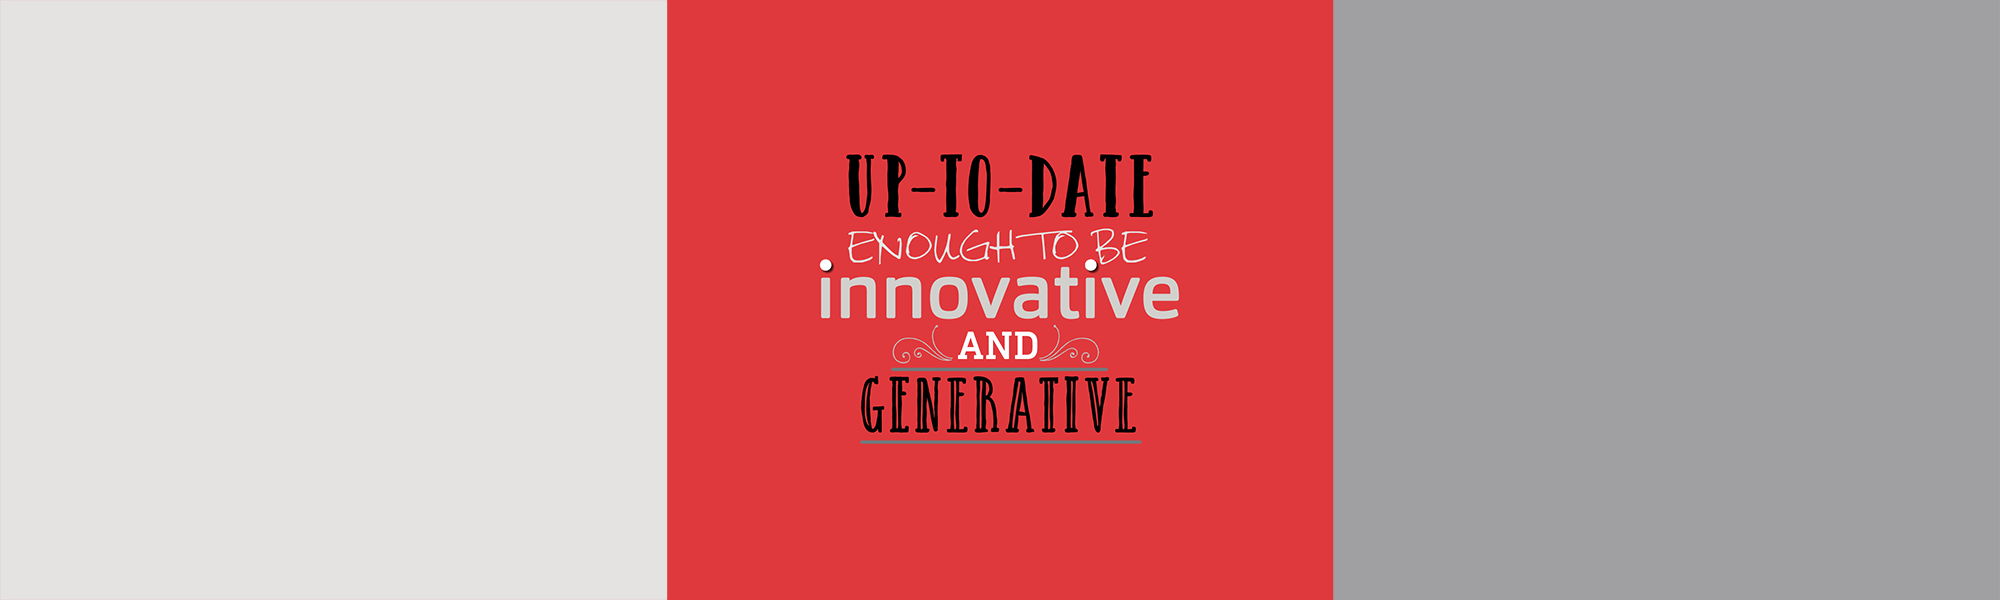 Up-to-date enough to be innovative and generative